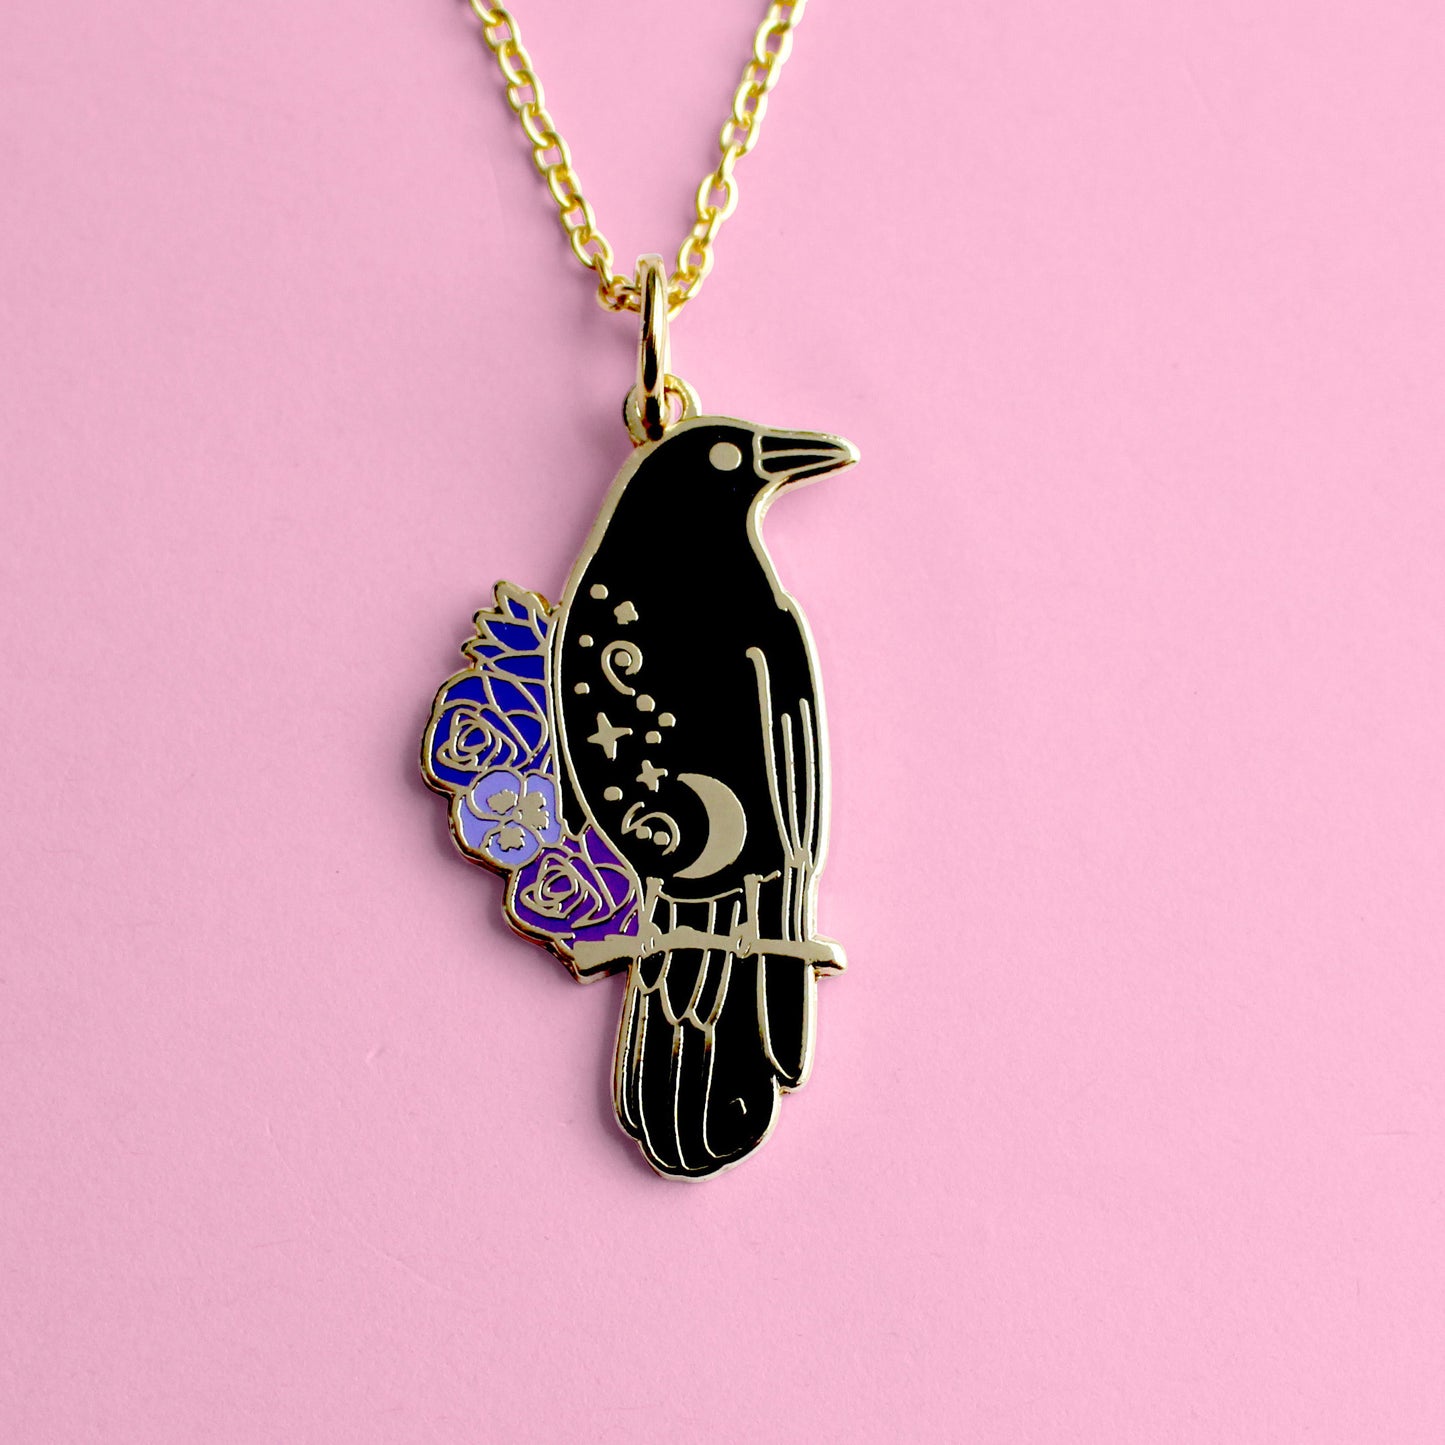 Crow necklace